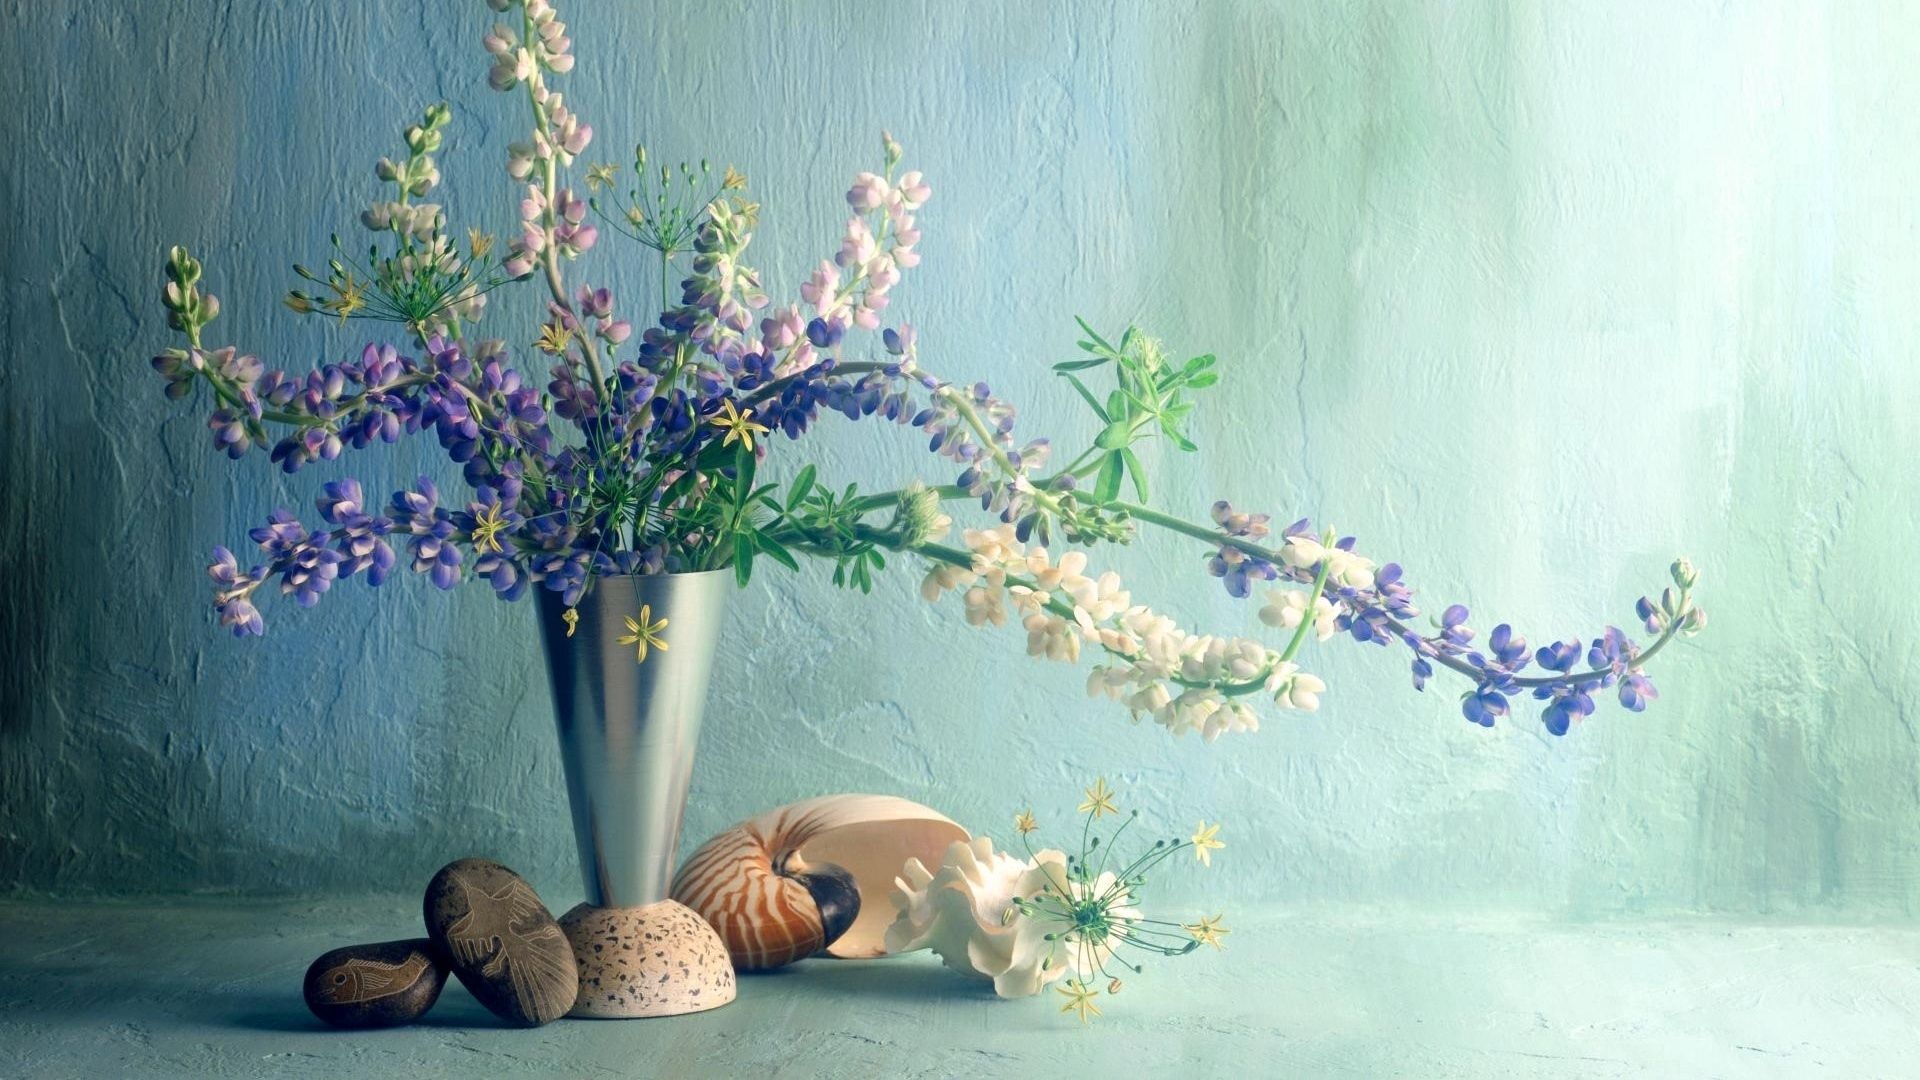 flowers, shells, bouquet, wall, vase, lupins